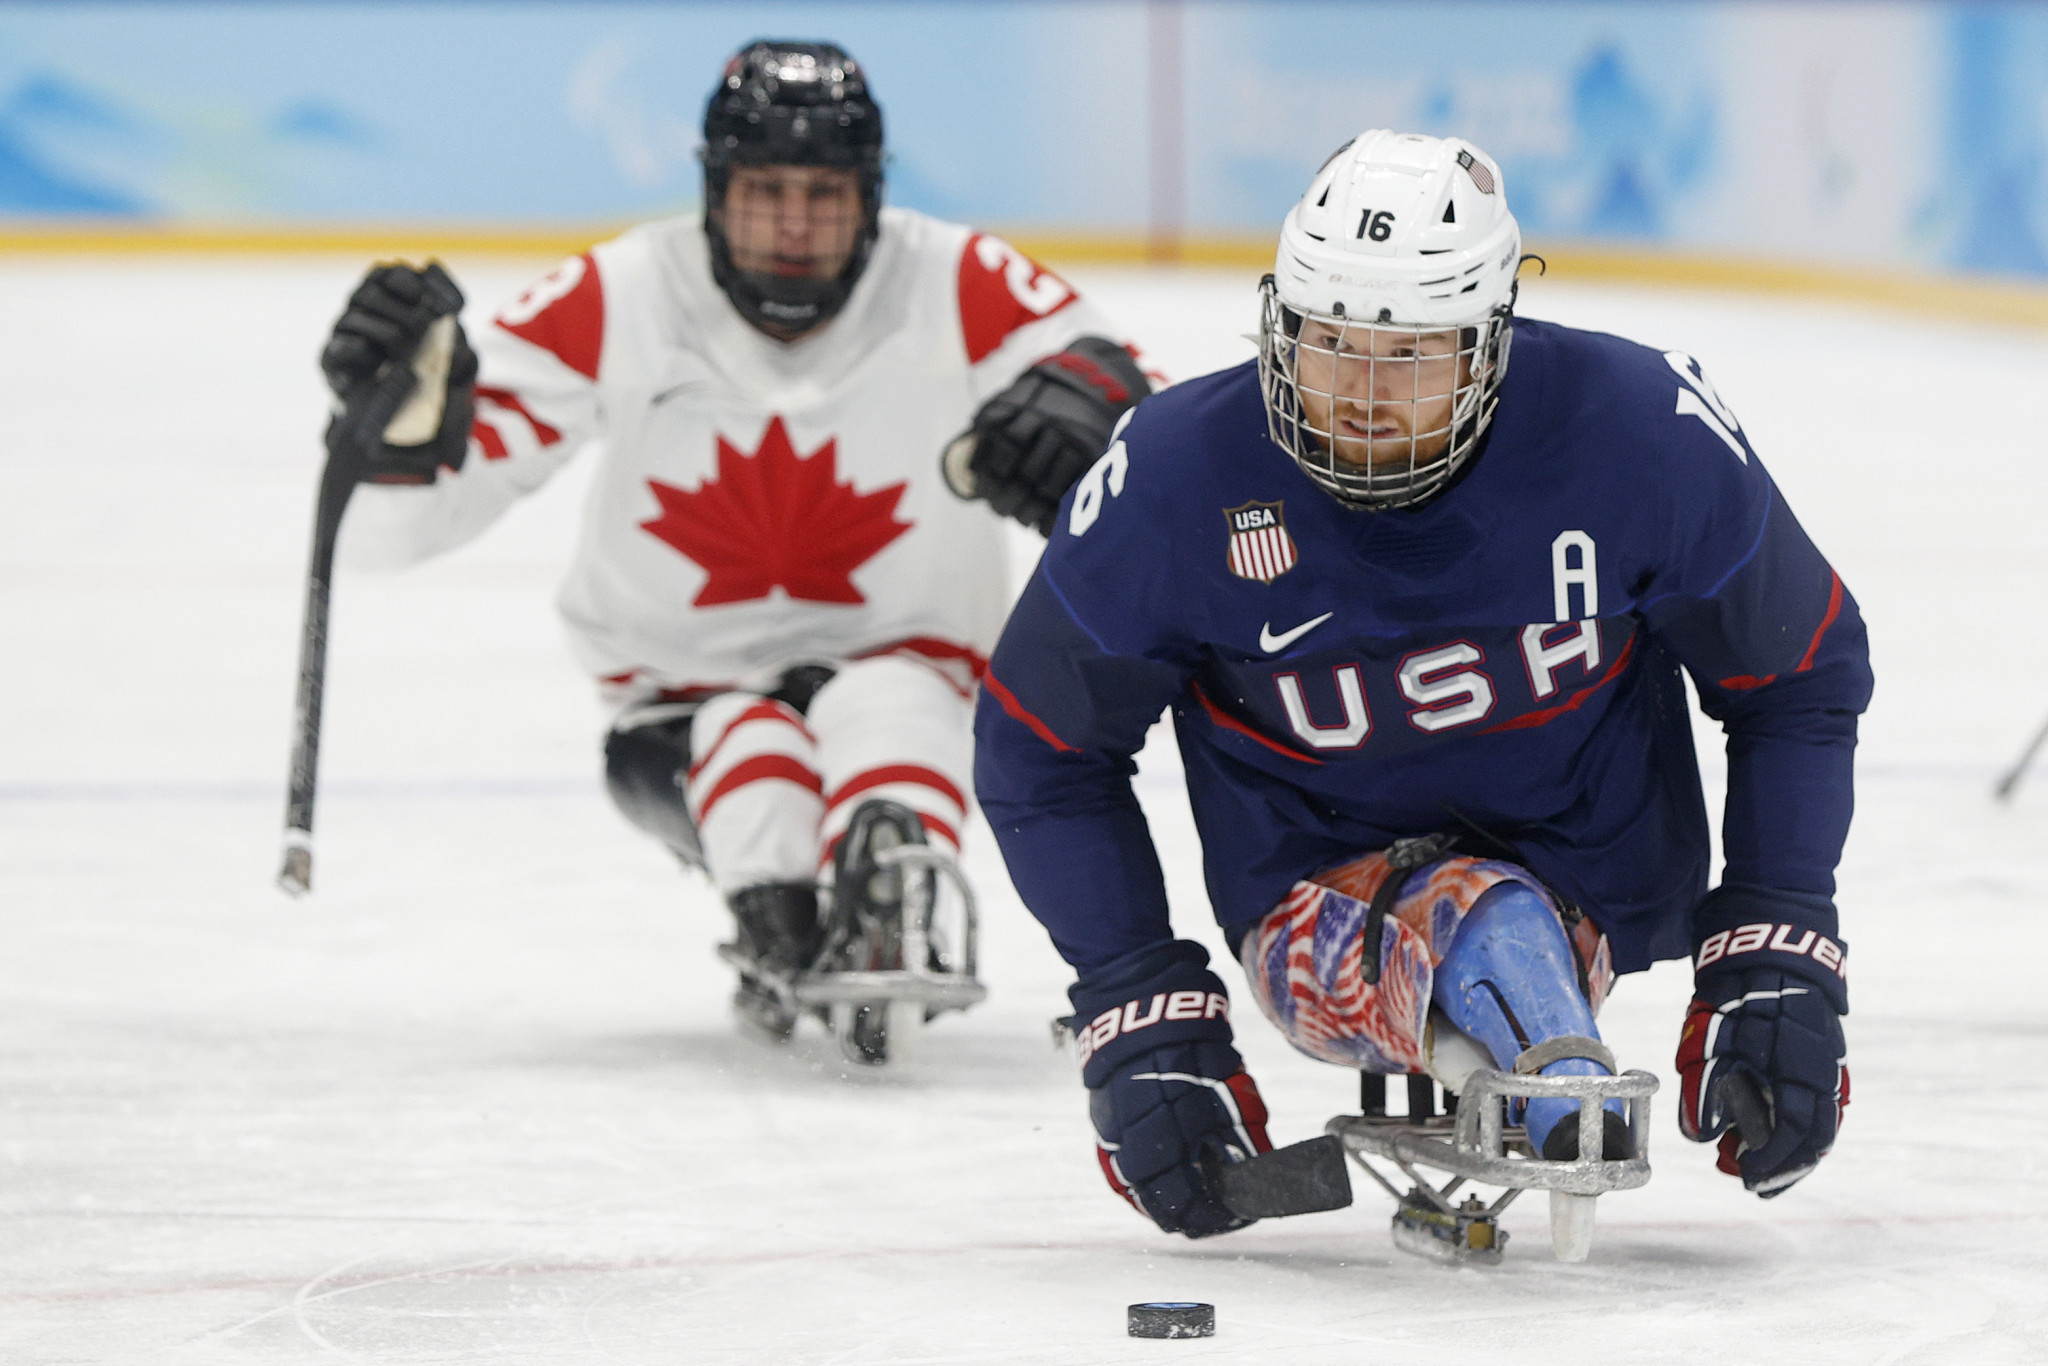 United States thrash rivals Canada after opening day of Para ice hockey at Beijing 2022